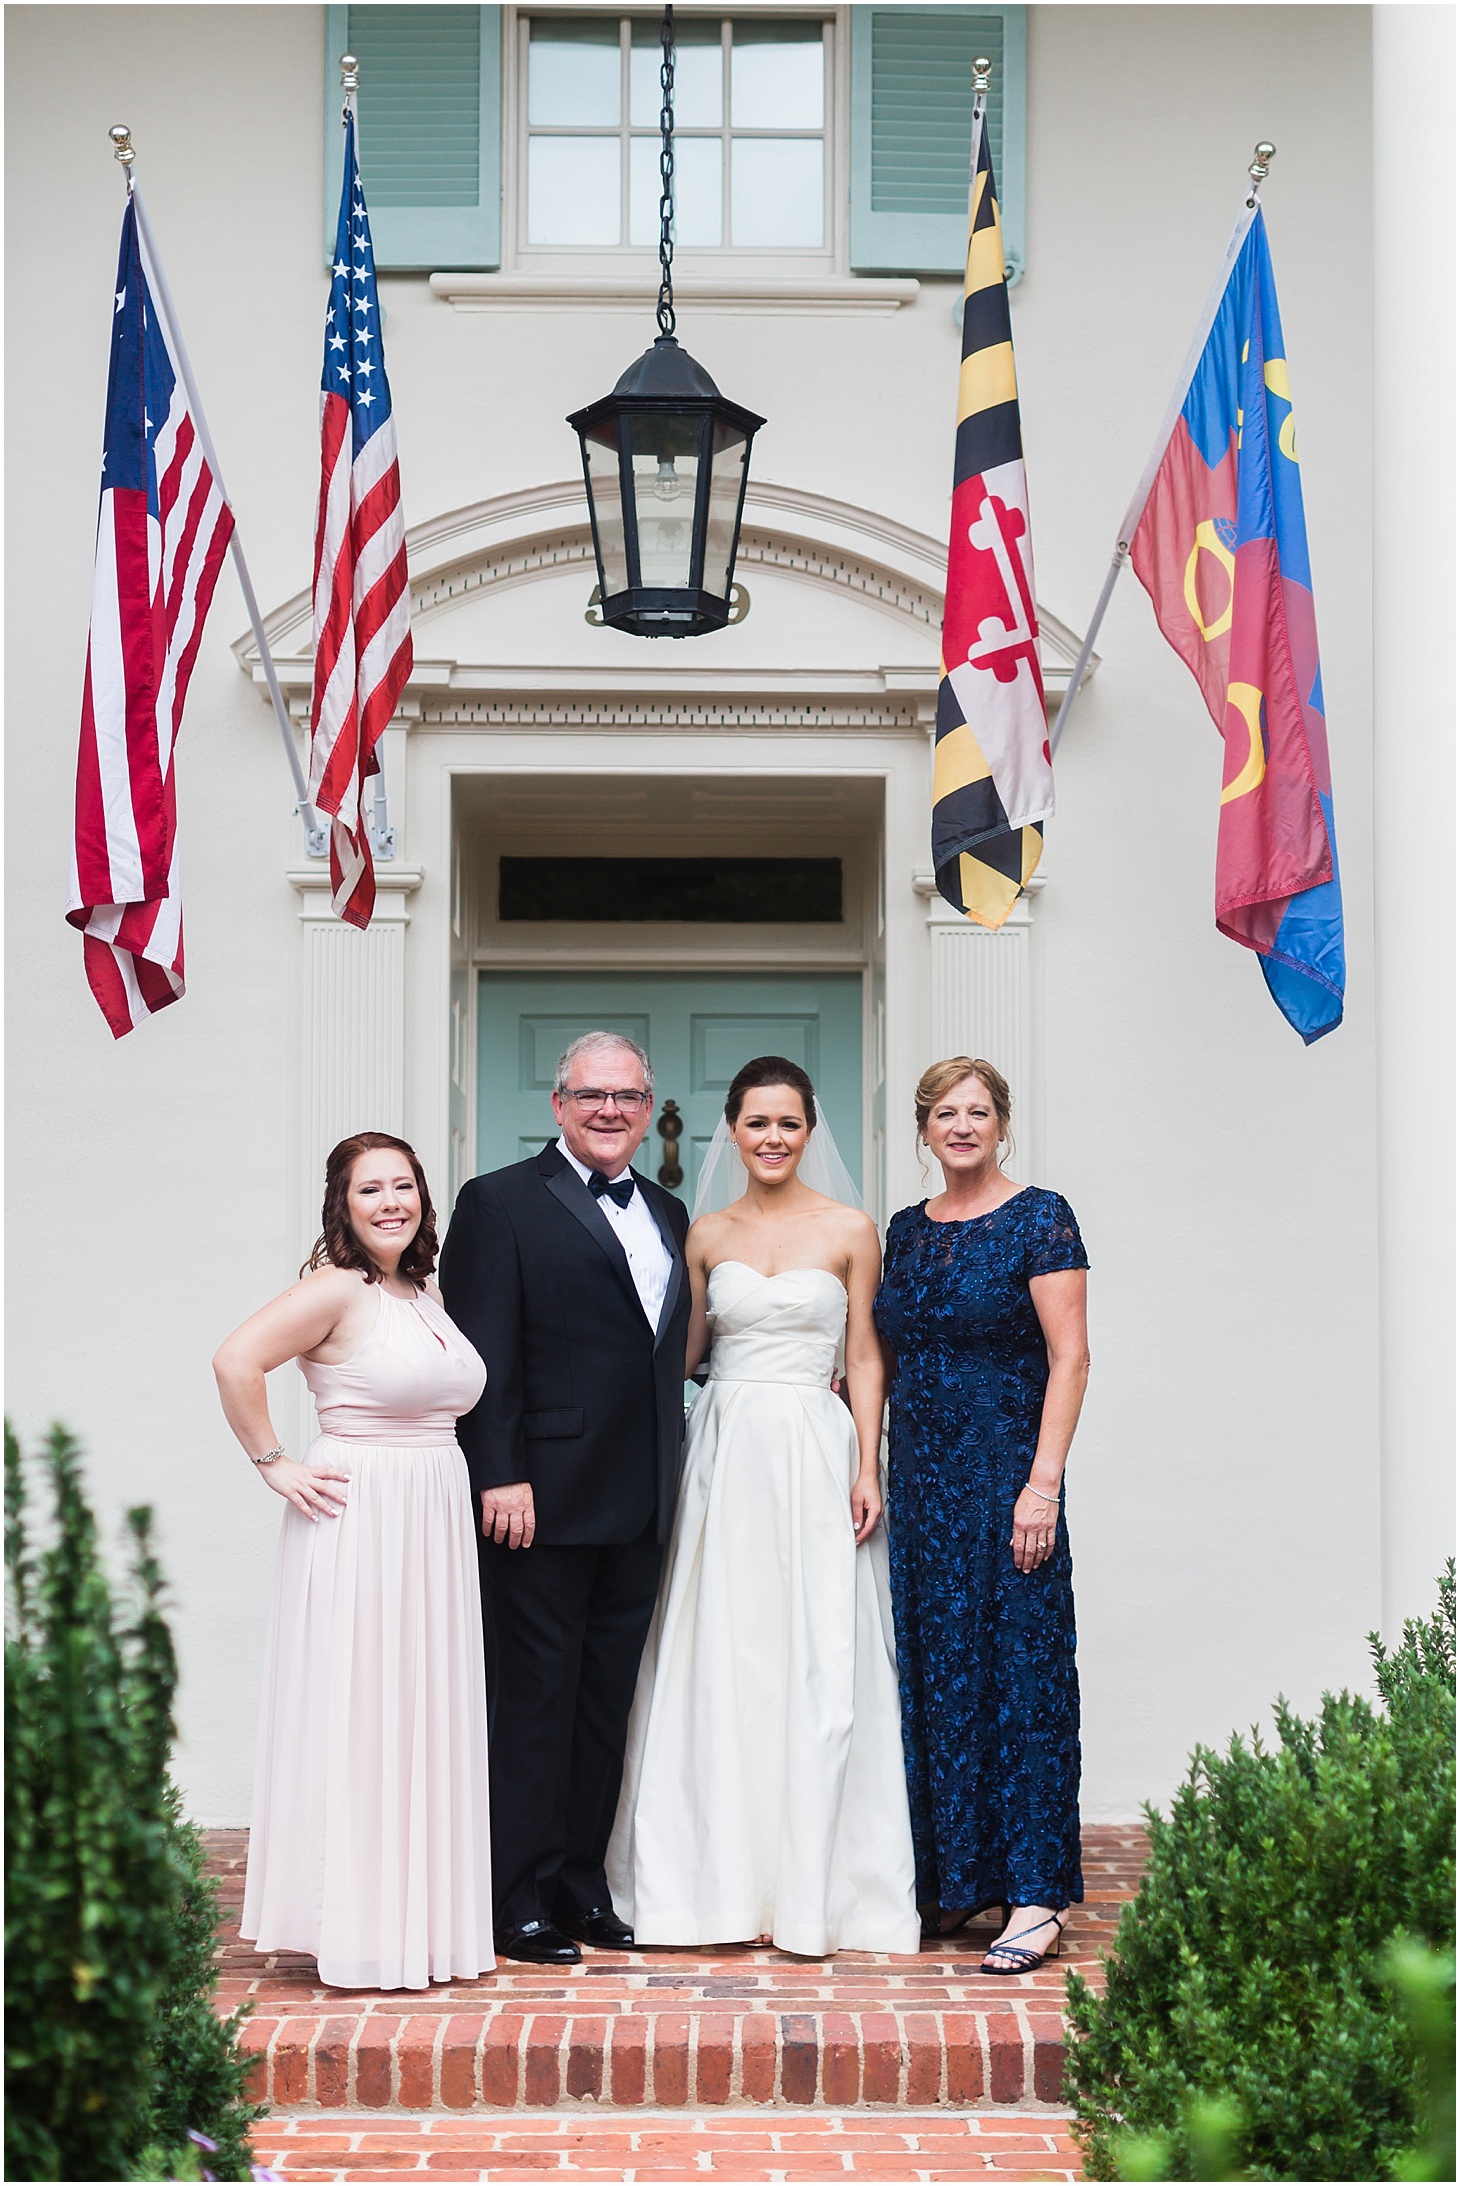 Family Portrait Outside of Family Home in Maryland | Summer Rooftop Wedding at The Capitol View at 400 | Sarah Bradshaw Photography | Washington DC Wedding Photographer